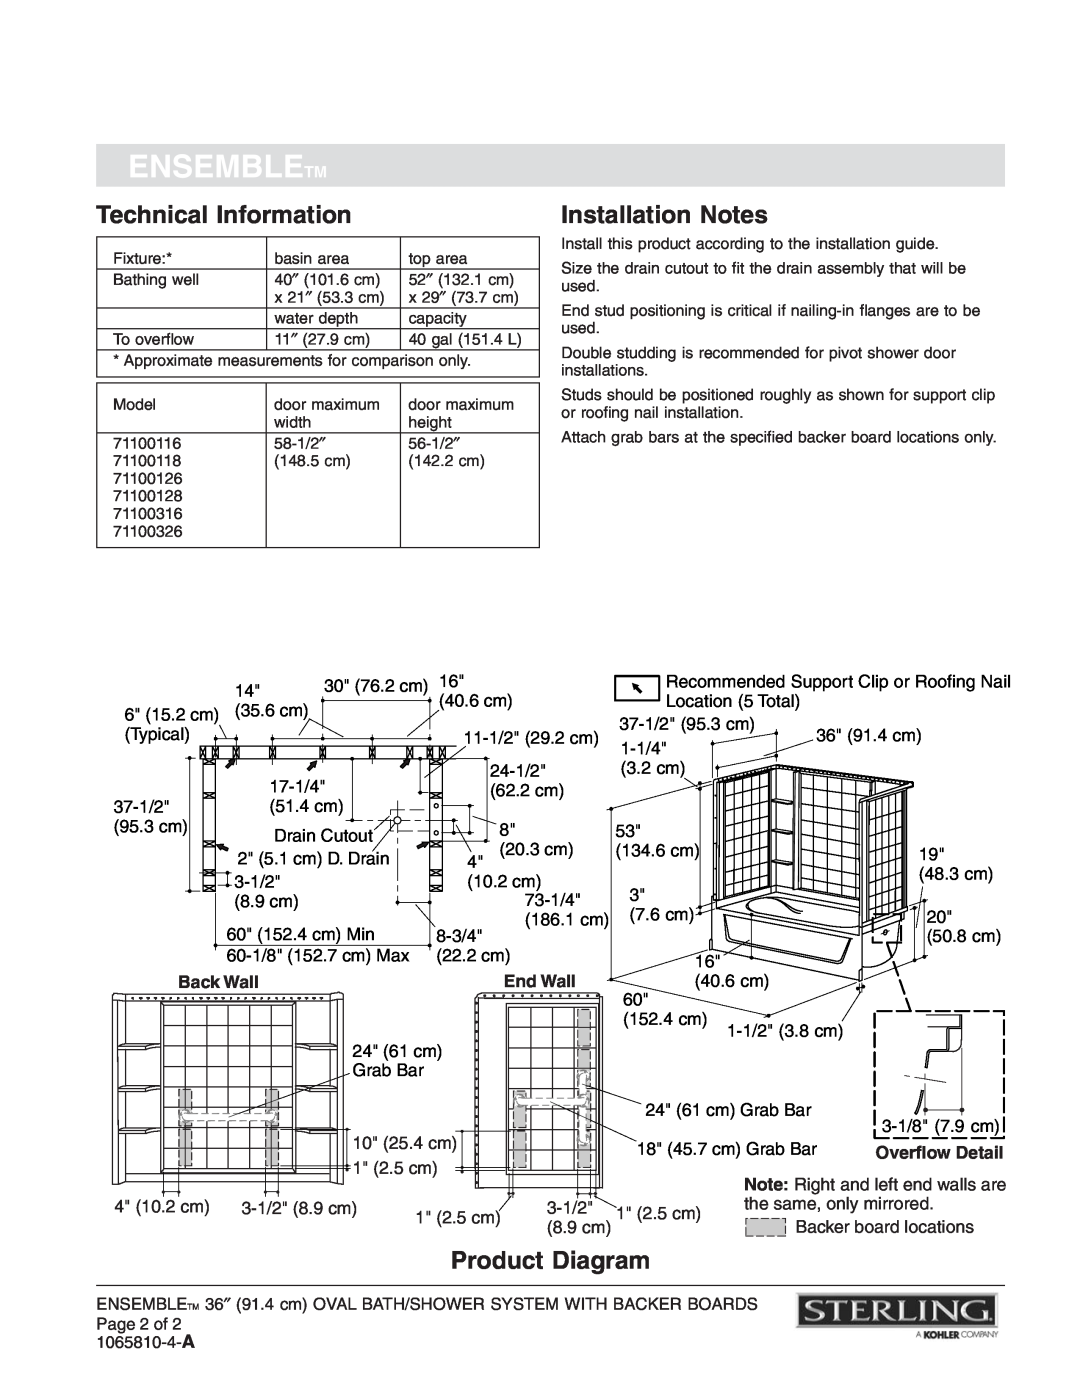 Sterling Plumbing 71100116 warranty Technical Information, Installation Notes, Product Diagram, Ensembletm, Back Wall 